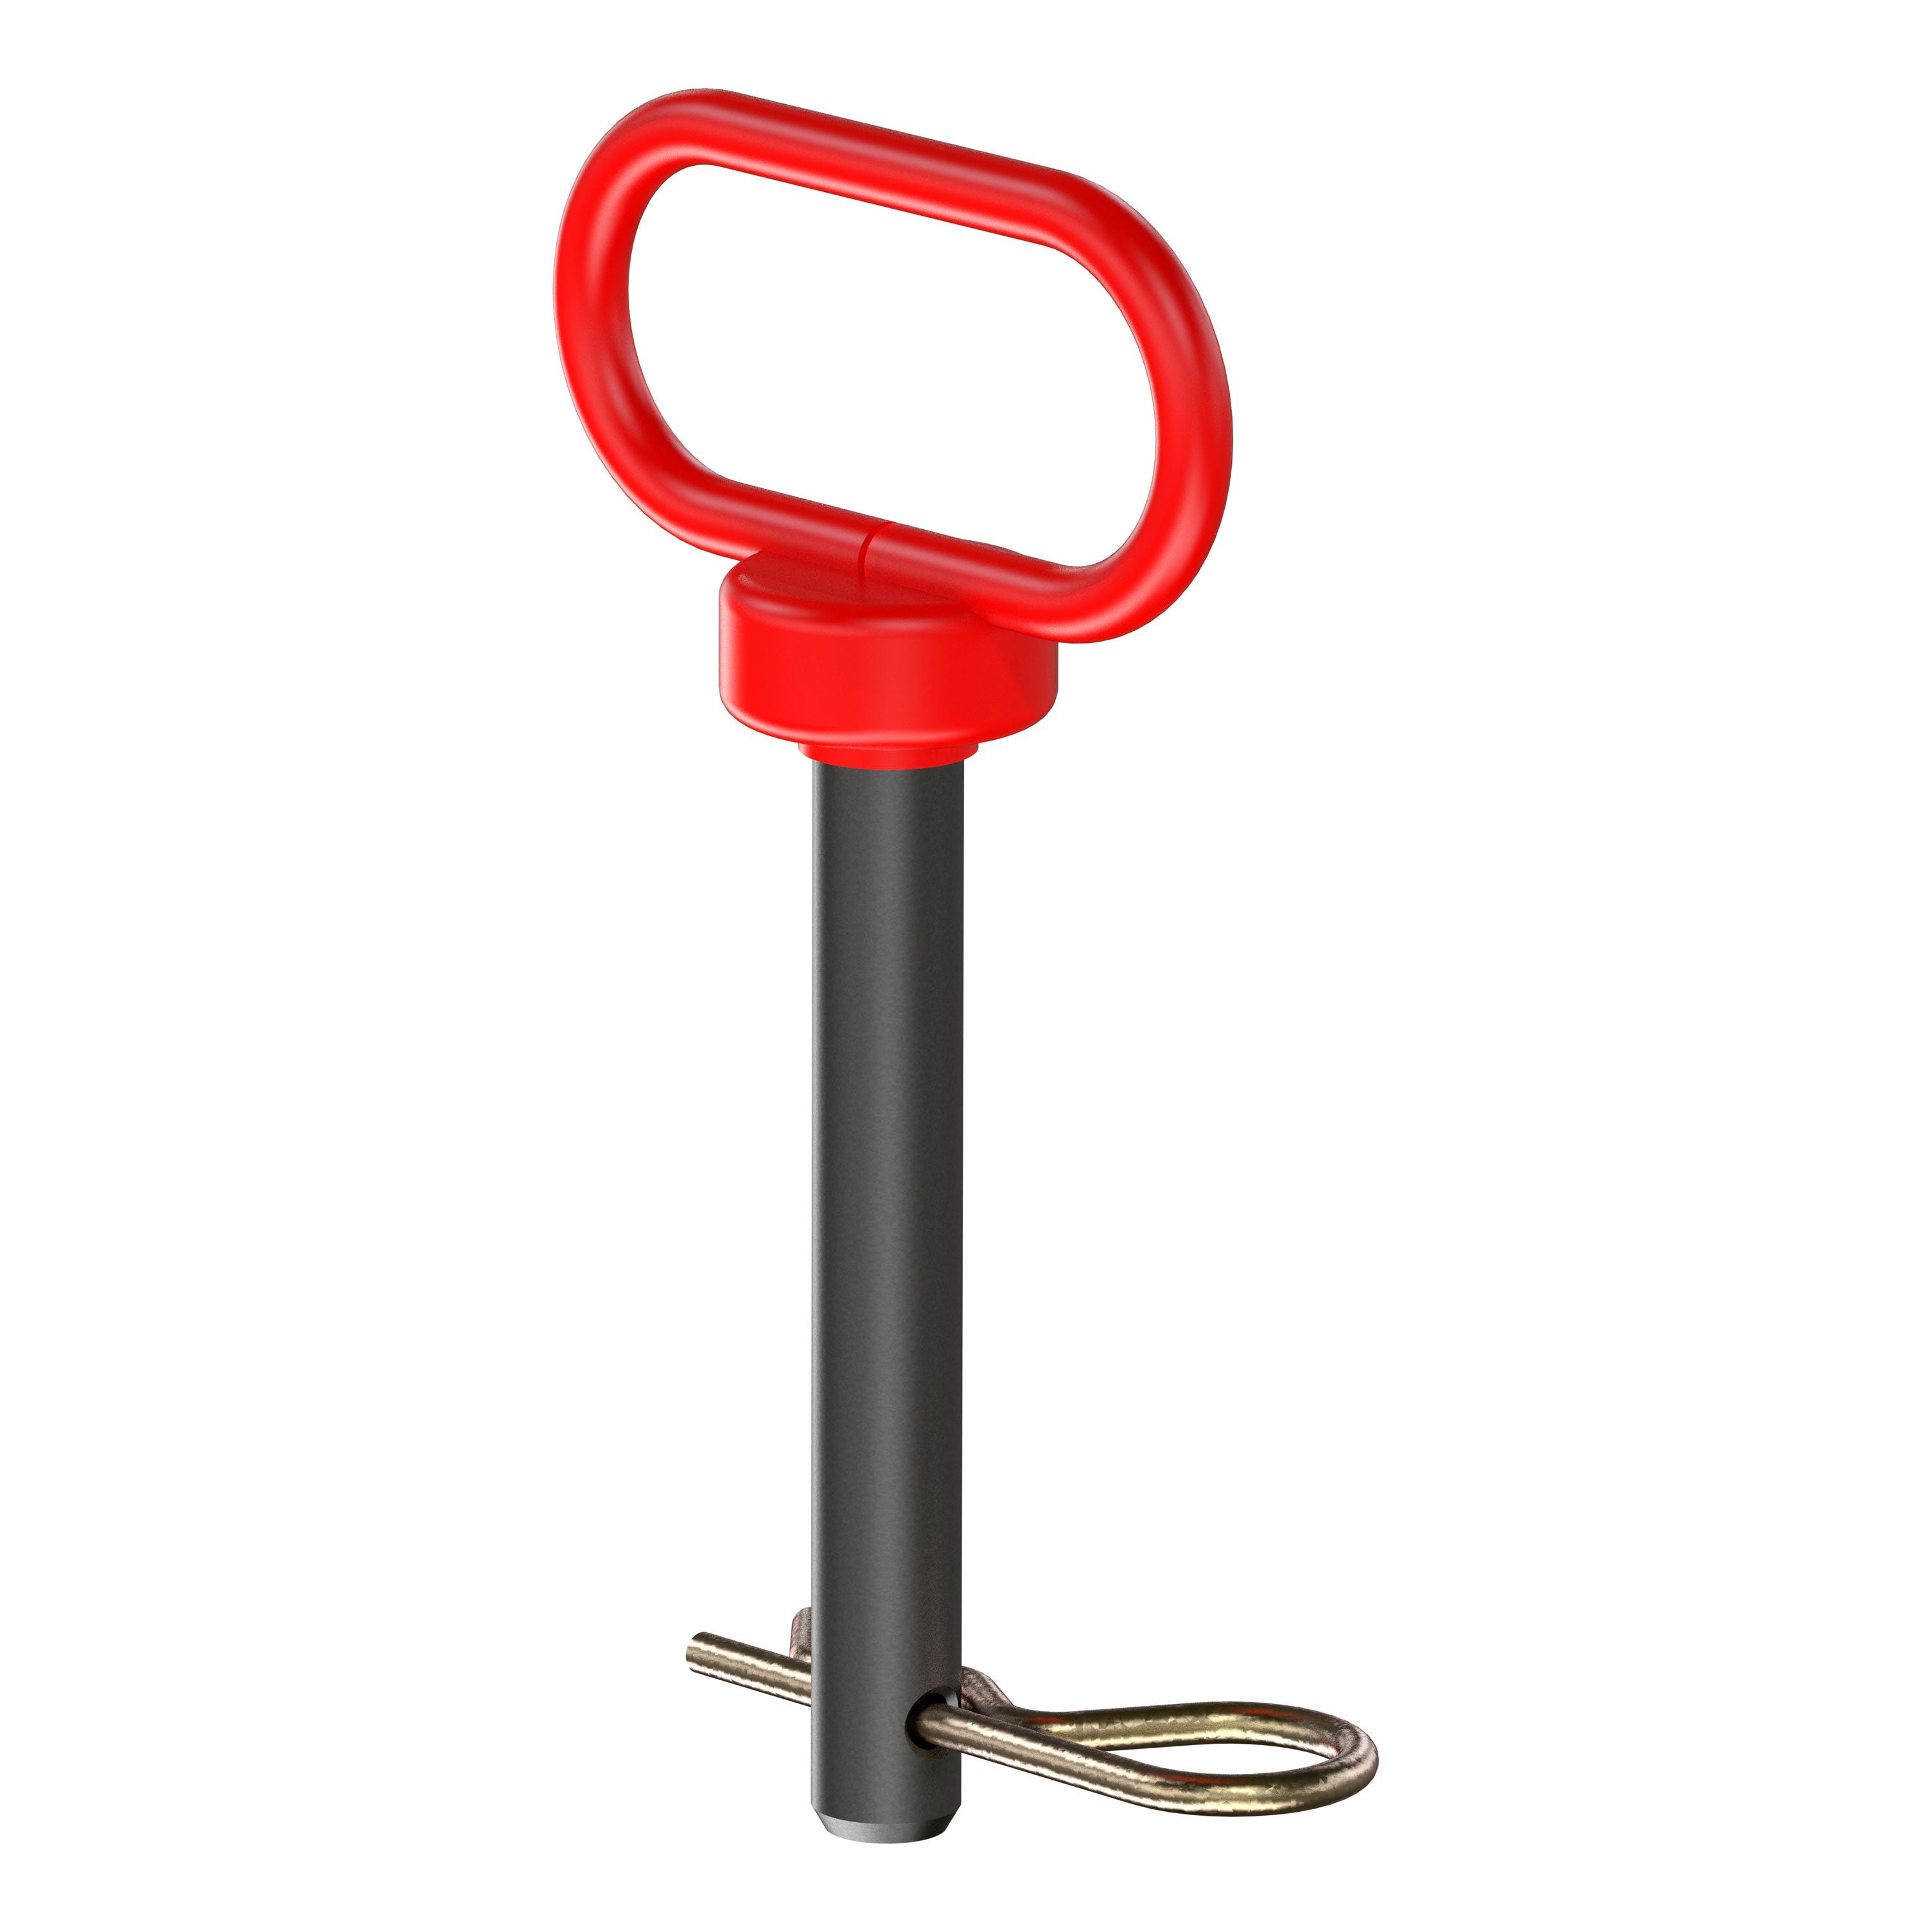 CURT 45804 5/8 Clevis Pin with Handle and Clip